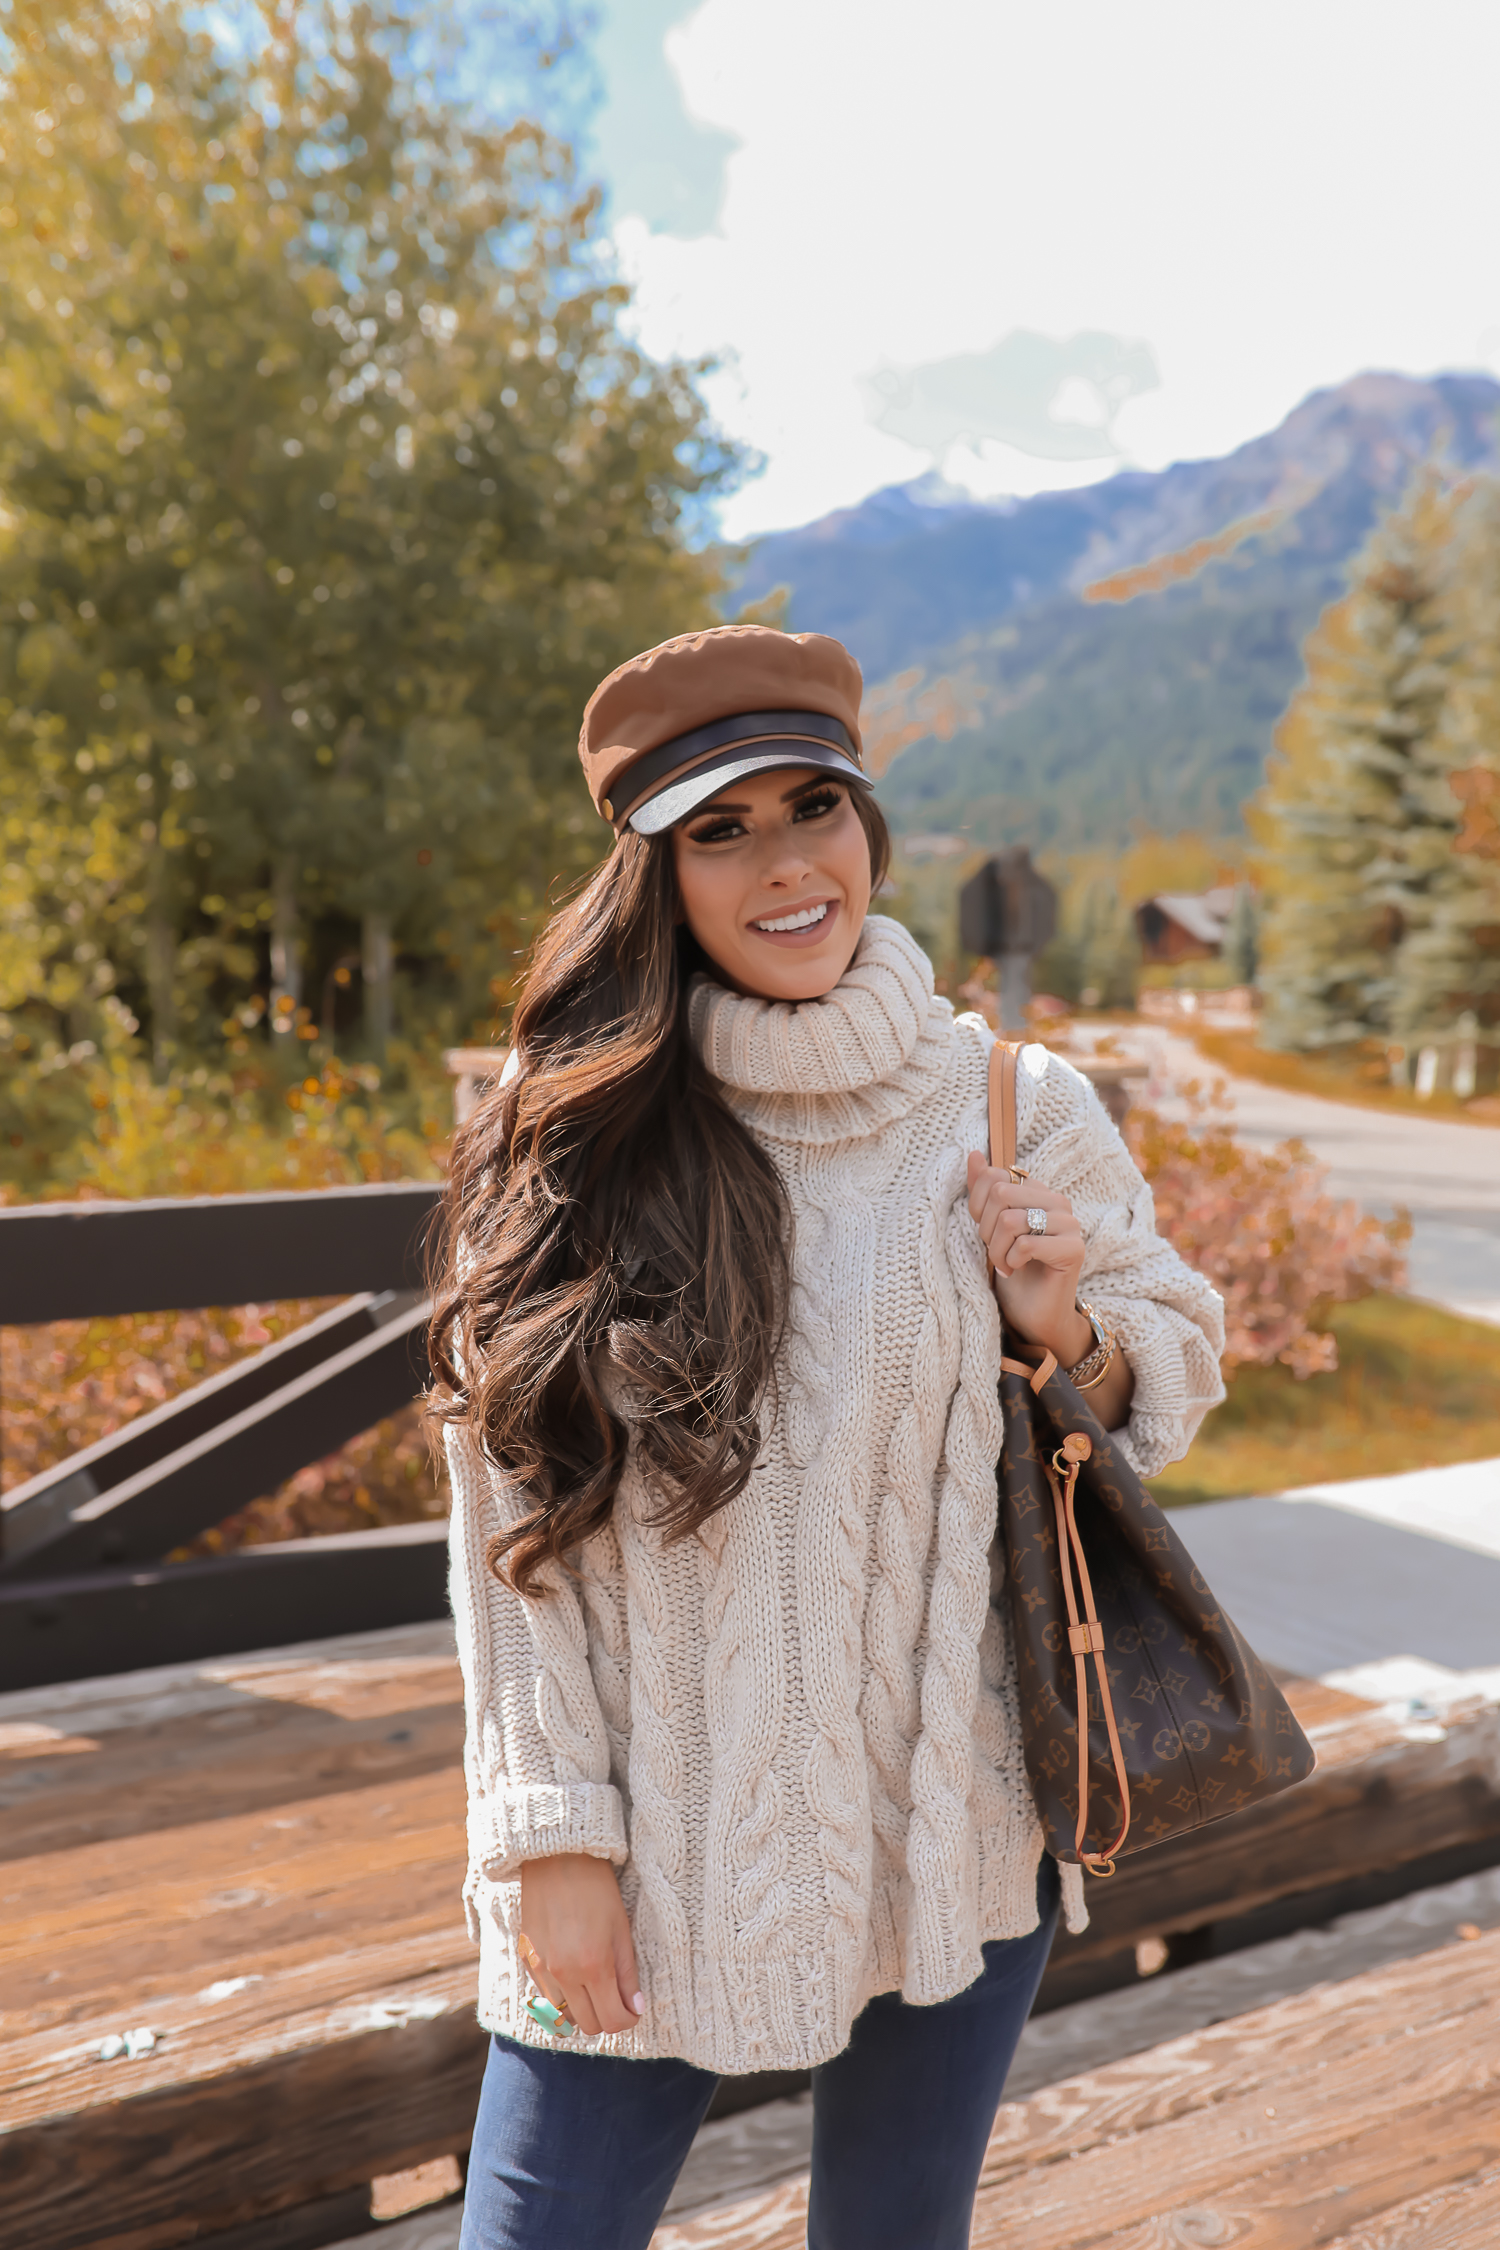 Cable knit sweater styled for Fall by top US fashion blog, The Sweetest Thing: image of a woman wearing a Topshop cable knit sweater, Express jeans, Steve Madden booties, Louis Vuitton handbag and Free People Ring.| fall sweaters and booties pinterest 2019,jackson hole fashion blogger, fall fashion 2019, oversized sweaters topshop nordstorm